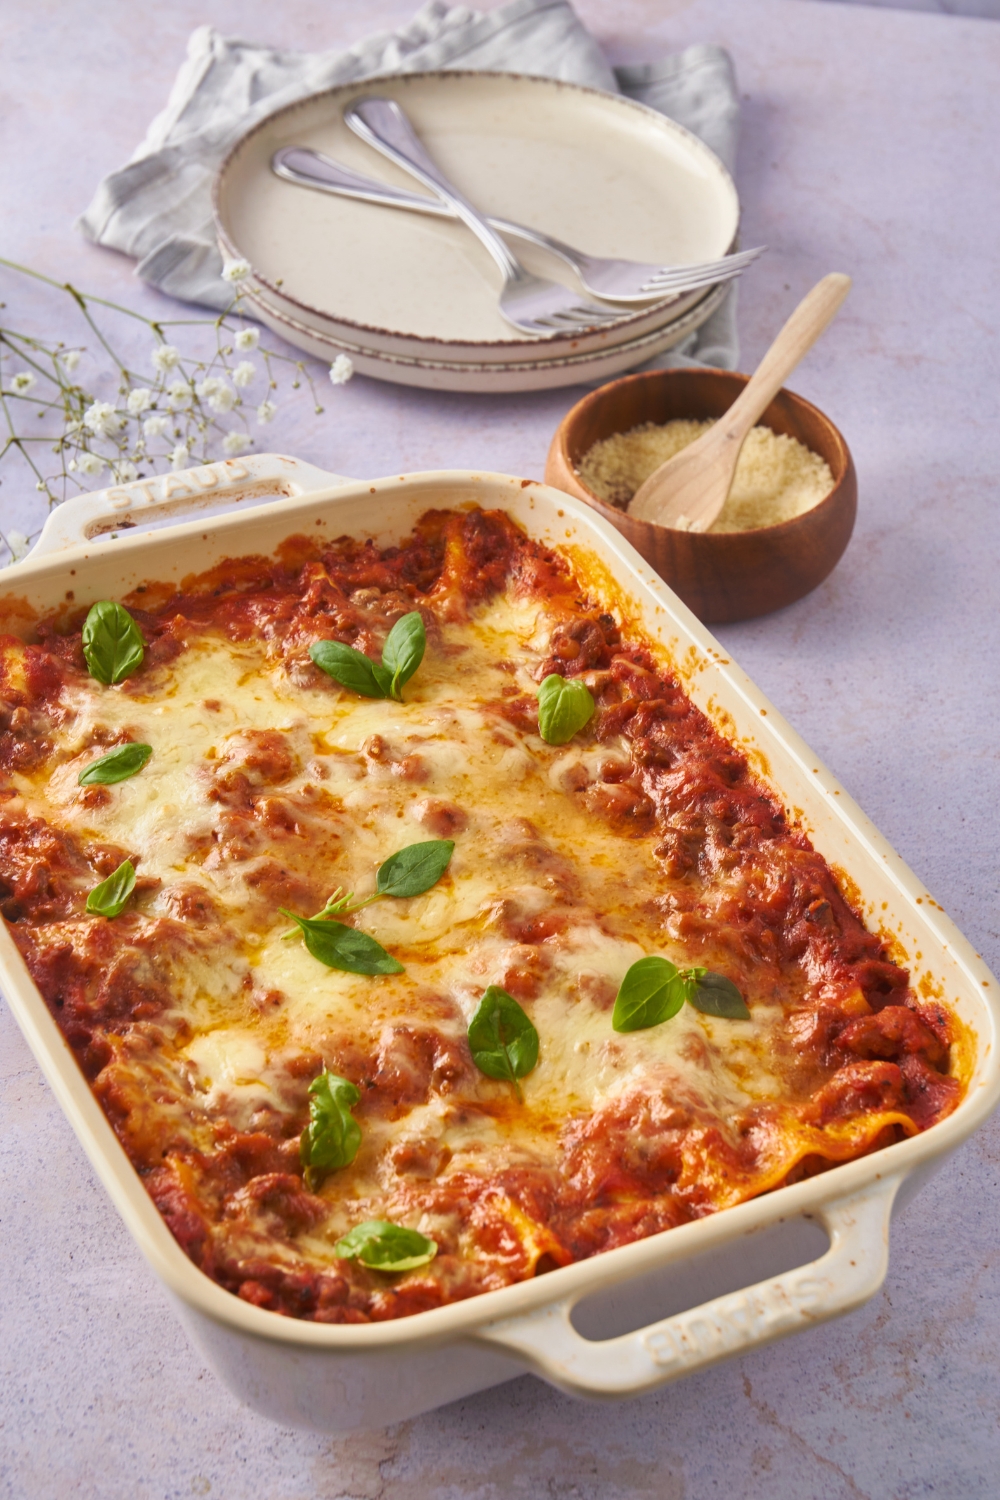 Baked lasagna covered in melted cheese and garnished with fresh basil.